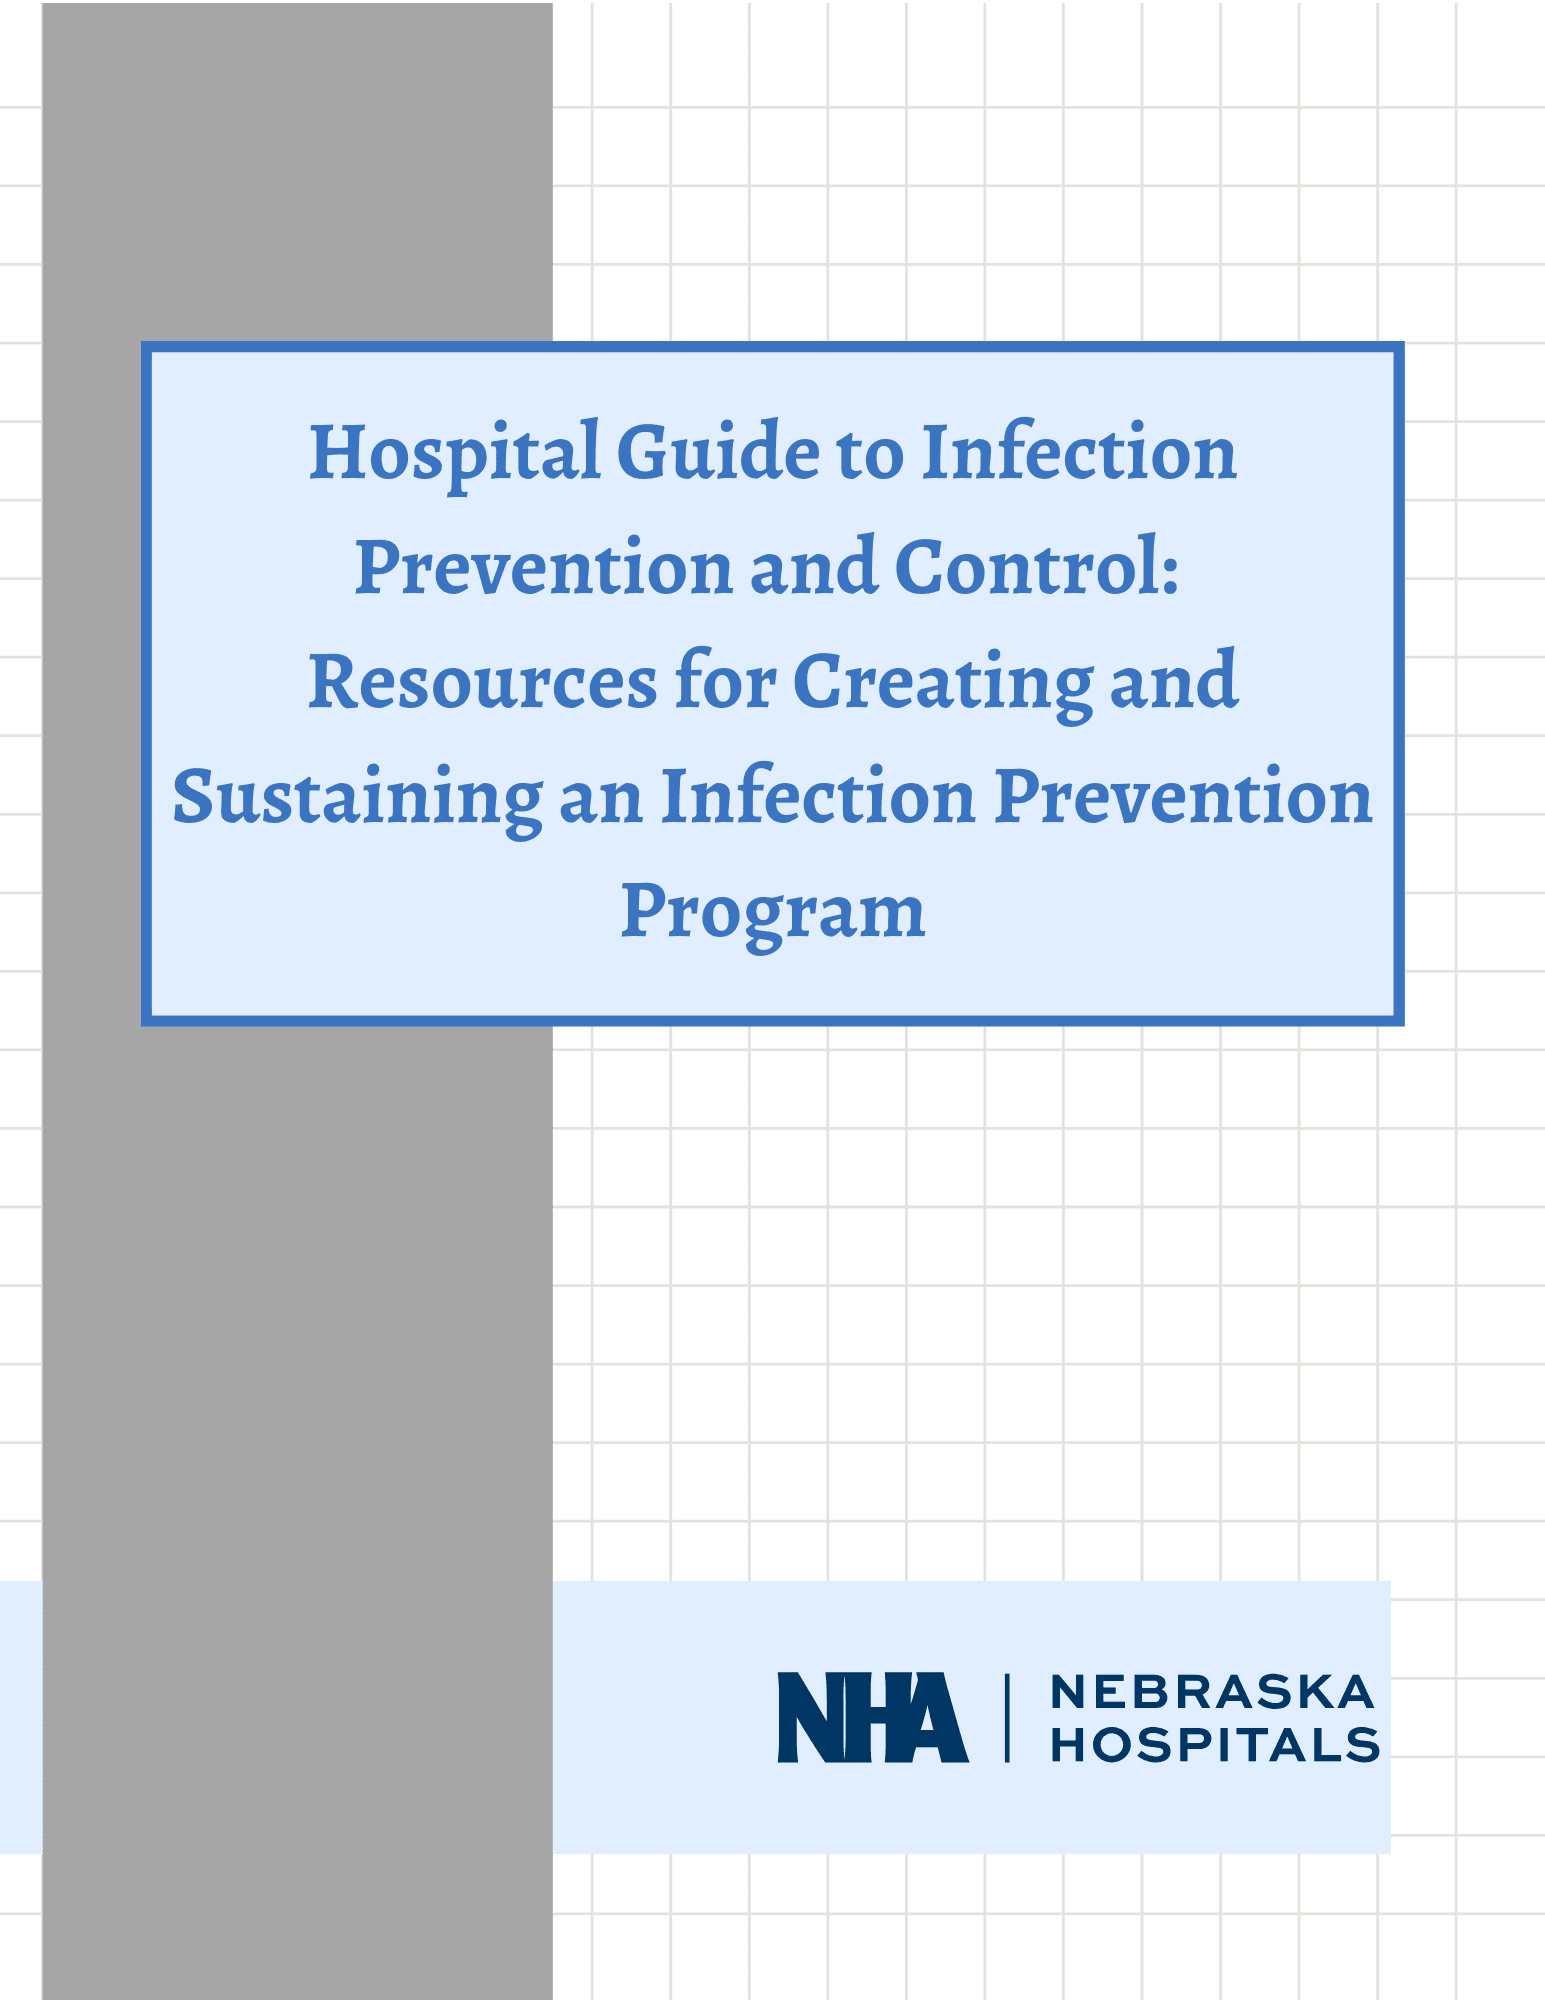 Hospital Guide to Infection Prevention and Control 